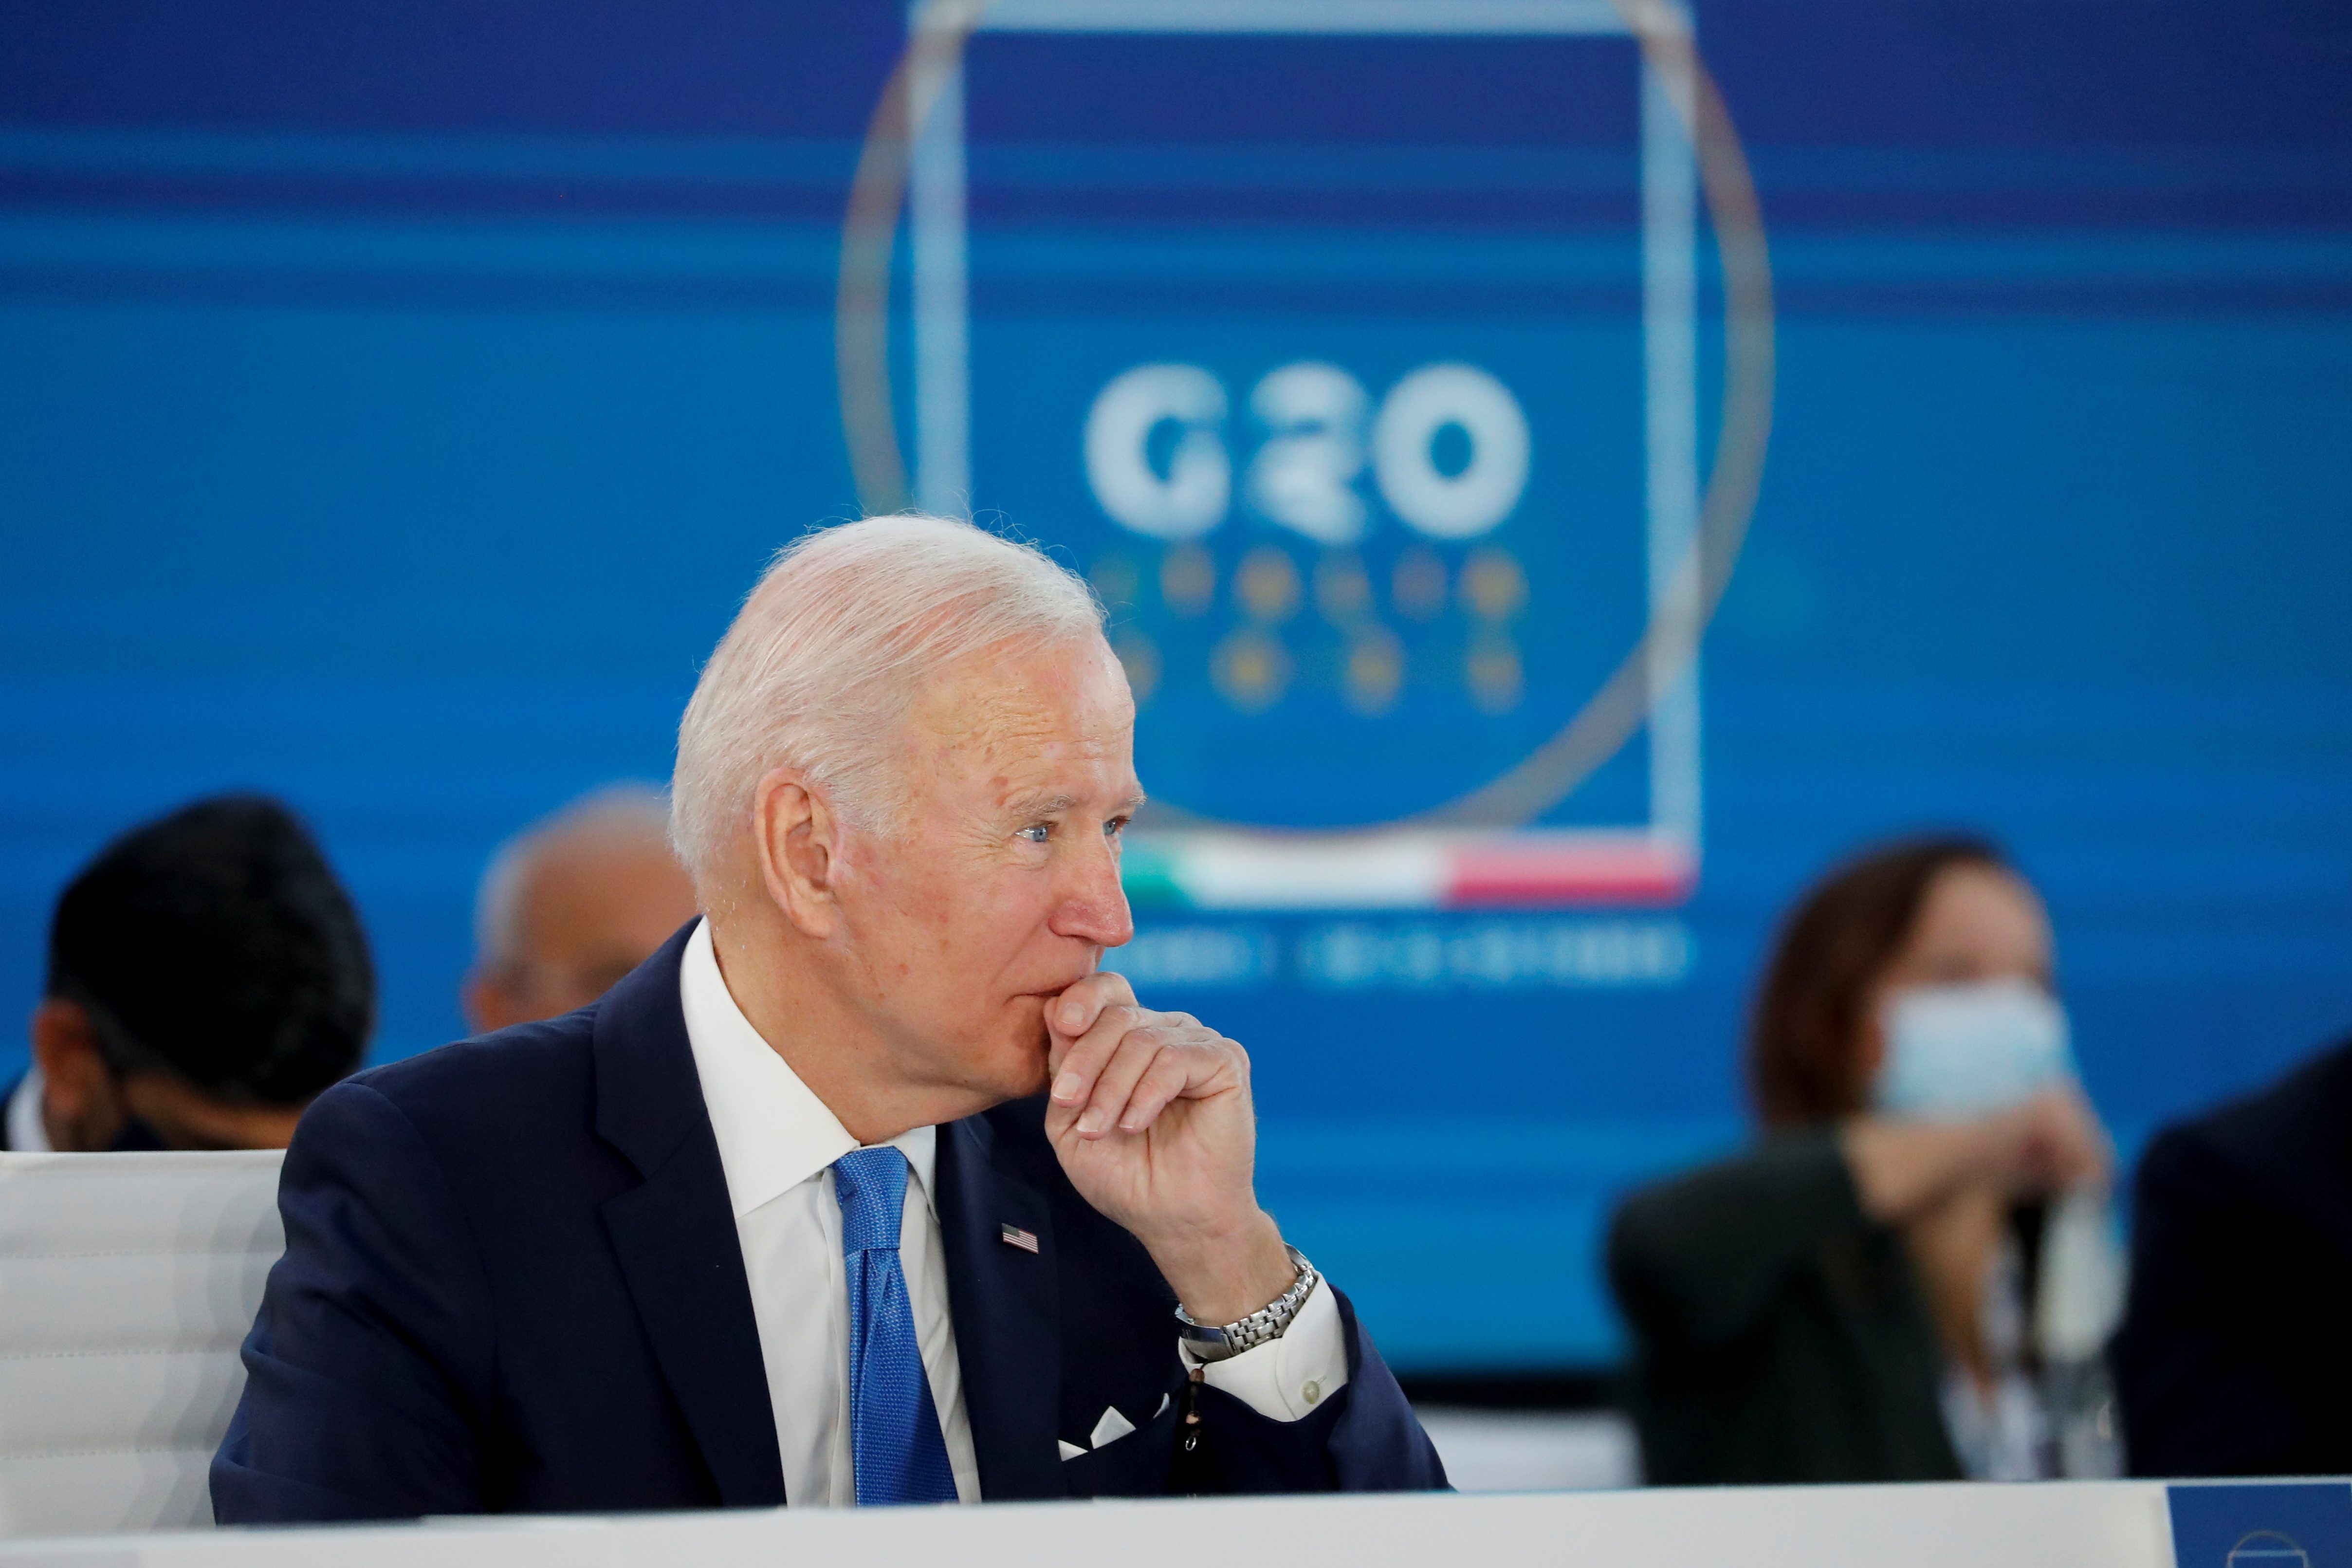 Biden pushes G20 energy producing countries to boost production